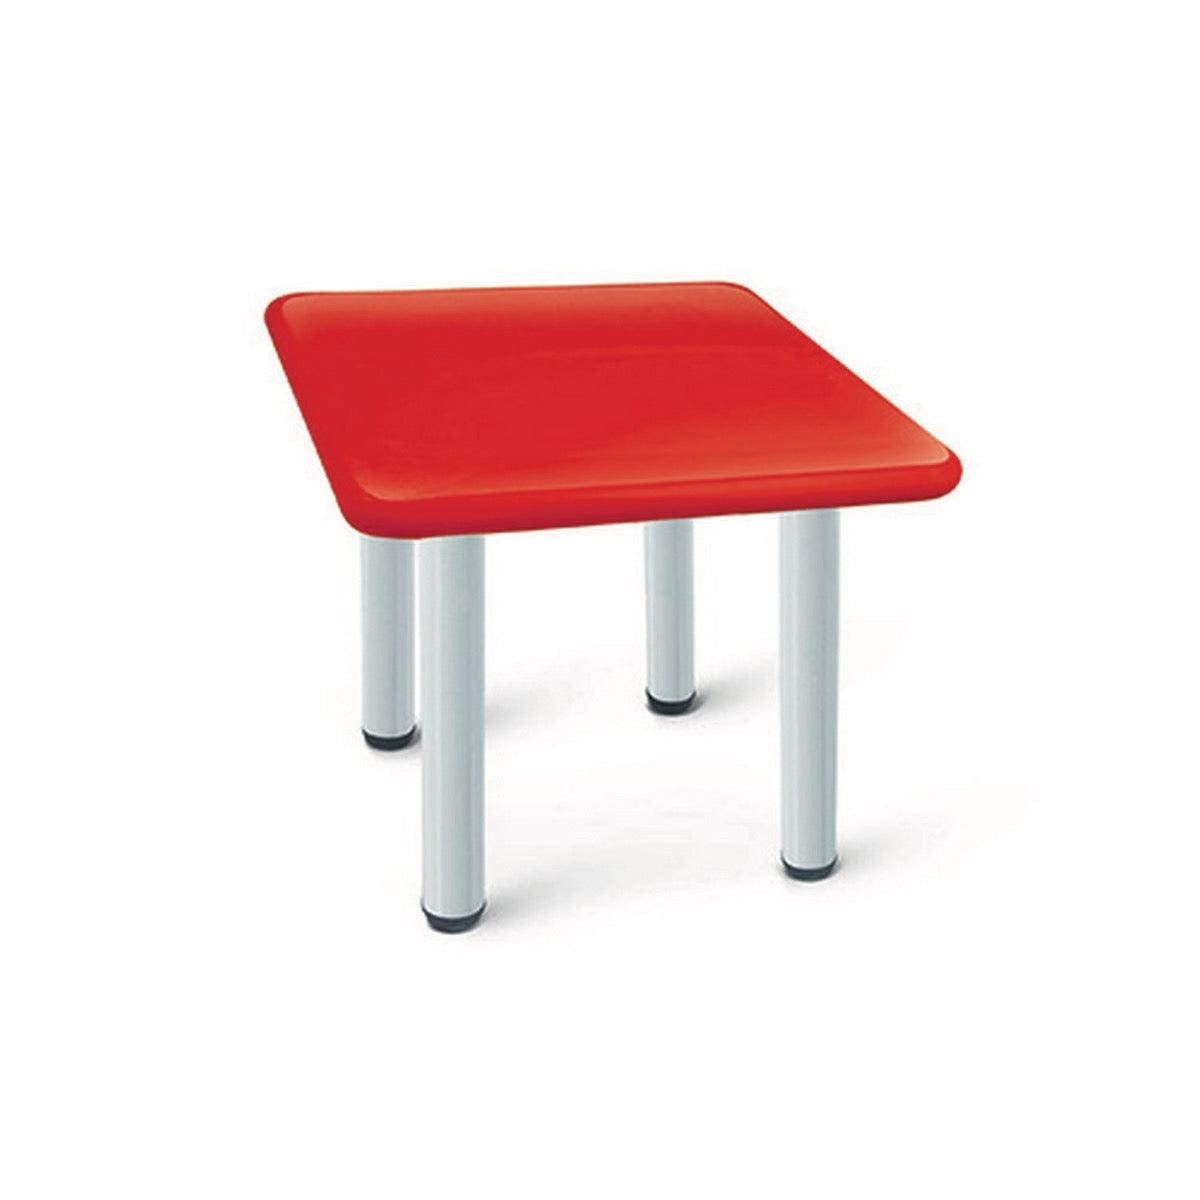 Ok Play Square Table, Smooth & Rounded Edges For Safety, Perfect For Home And School, Red, 2 to 4 Years